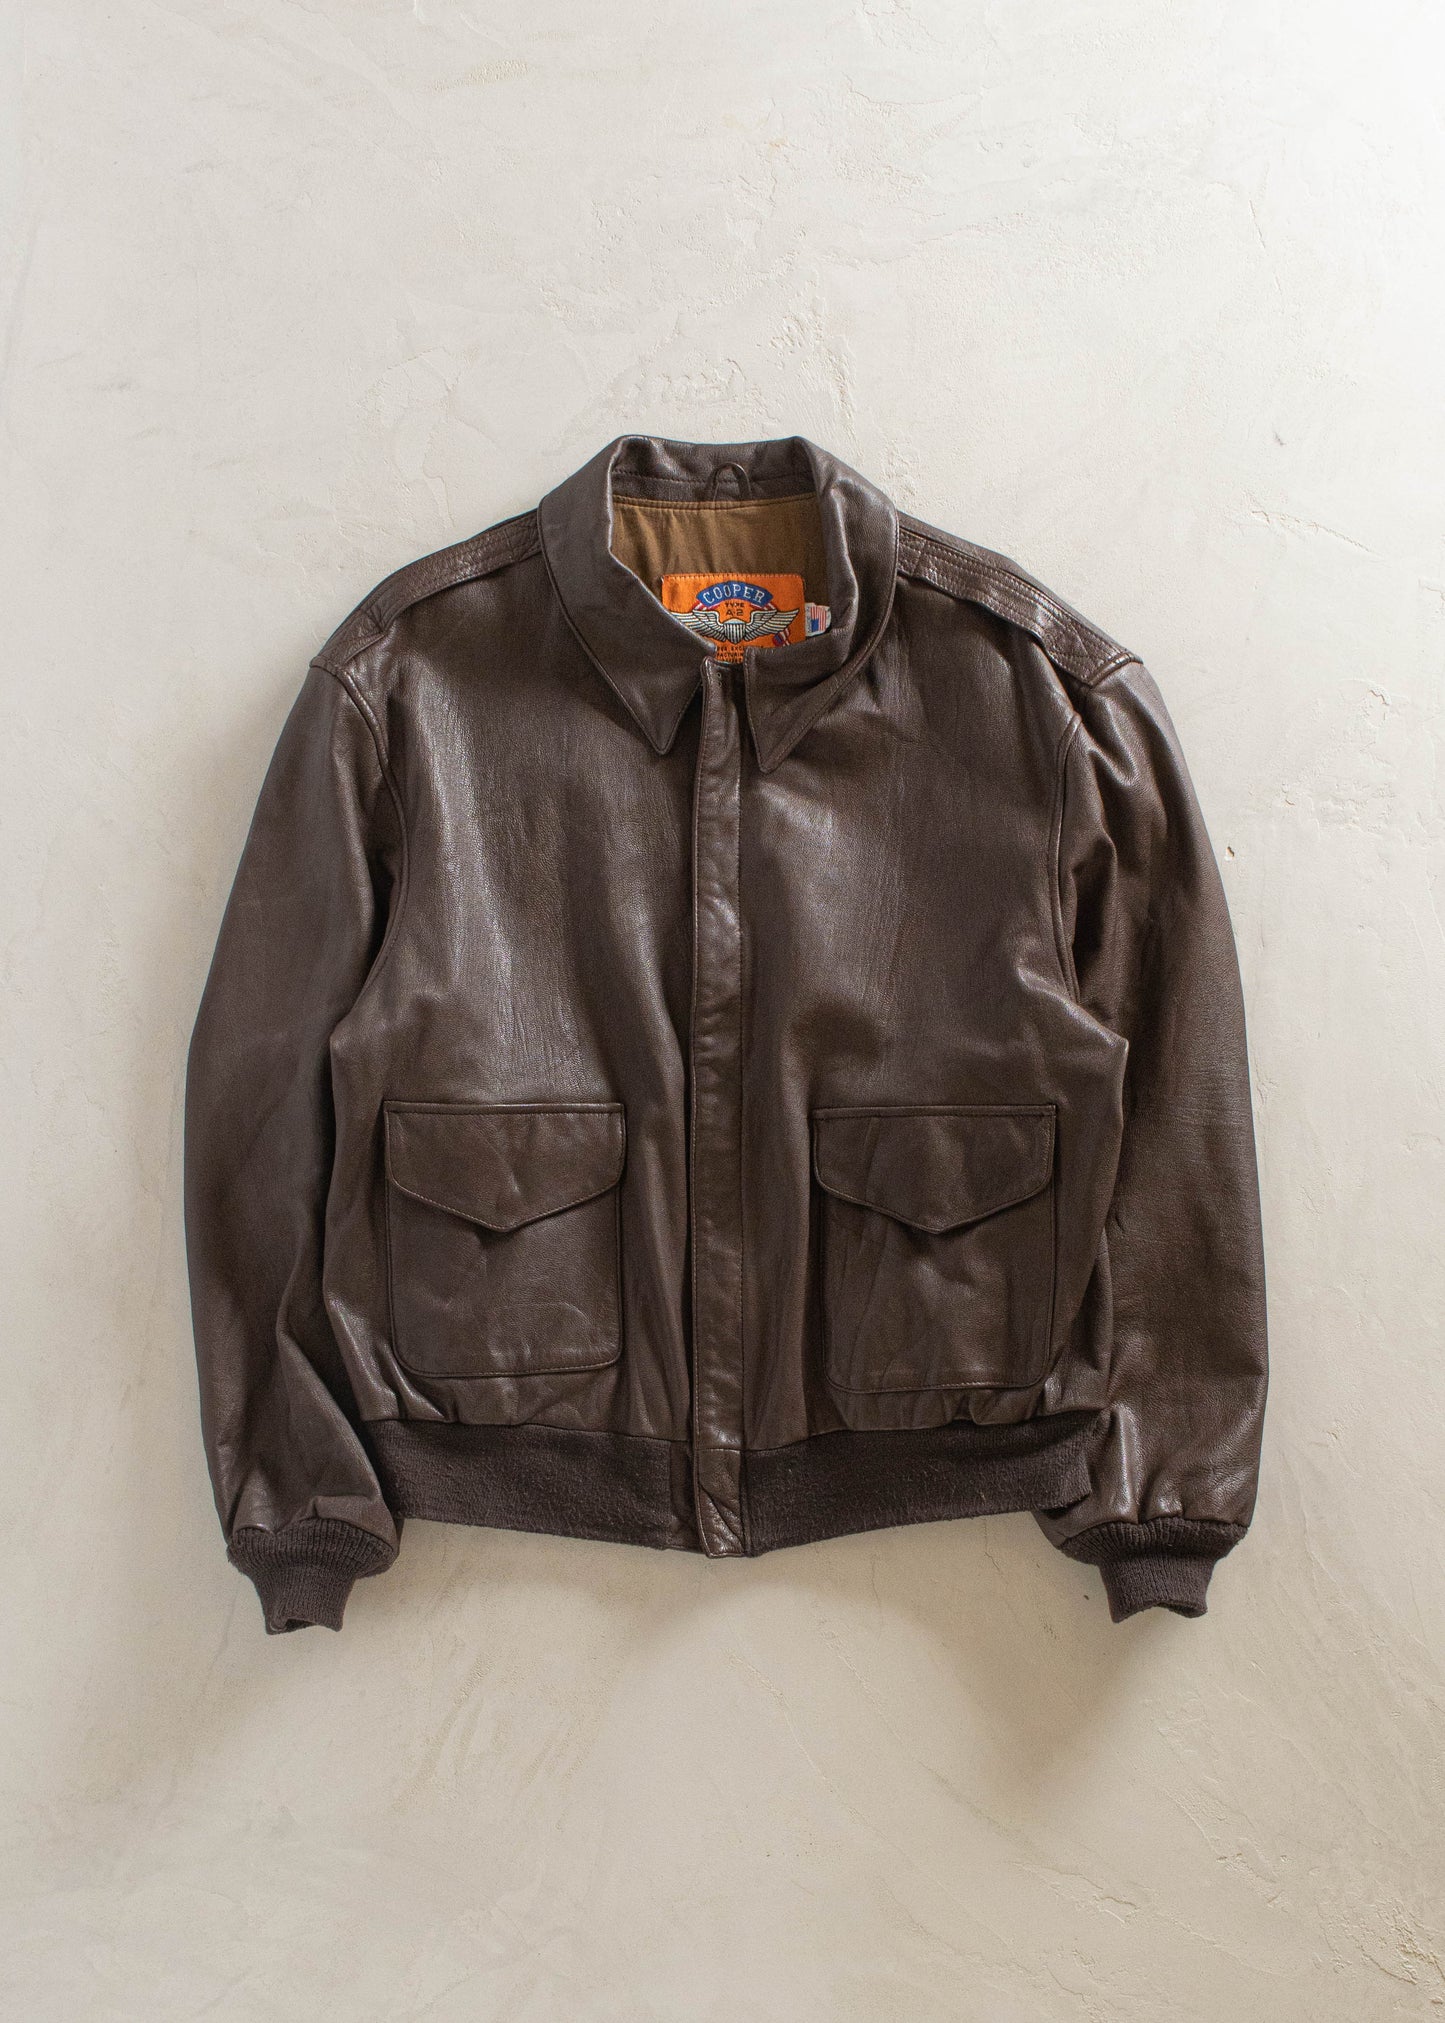 1980s Cooper Type A-2 Air Force Aviator Jacket Size XL/2XL